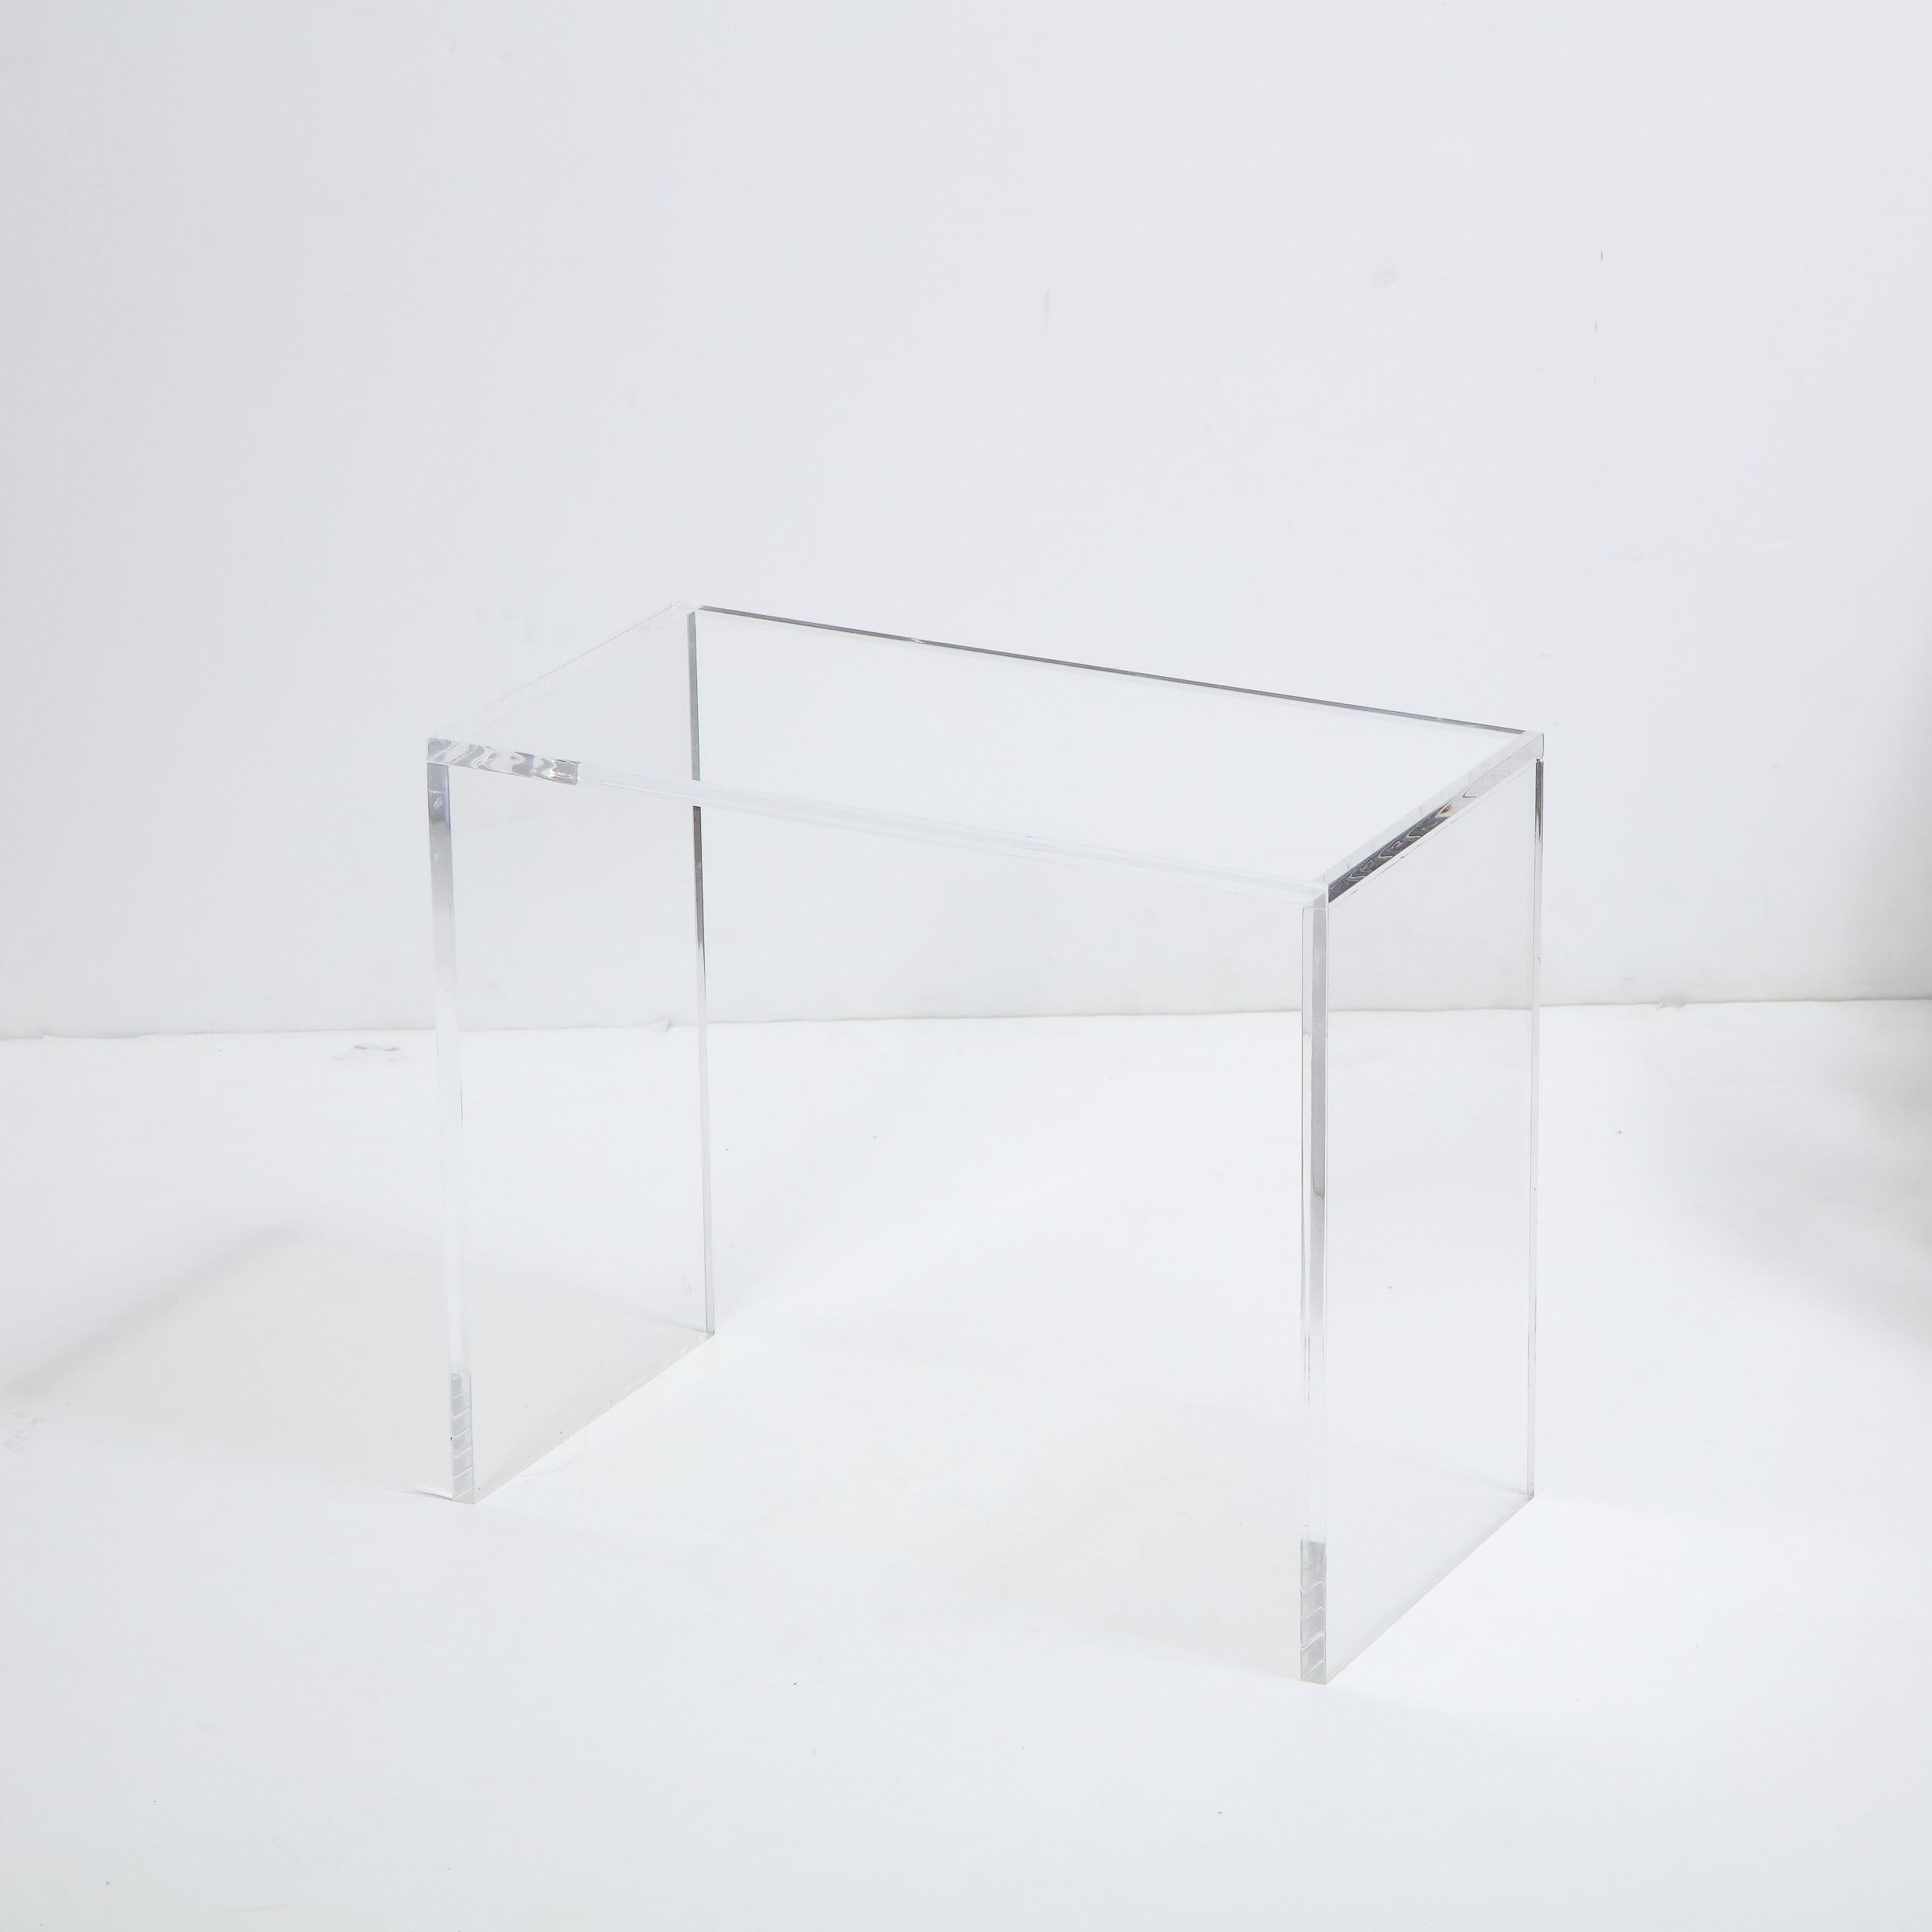 This refined side table/ pedestal features two rectangular legs in translucent Lucite that connect to a top of the same form and material creating a seamless Silhouette. With its clean modernist lines and Minimalist Silhouette, this piece promises